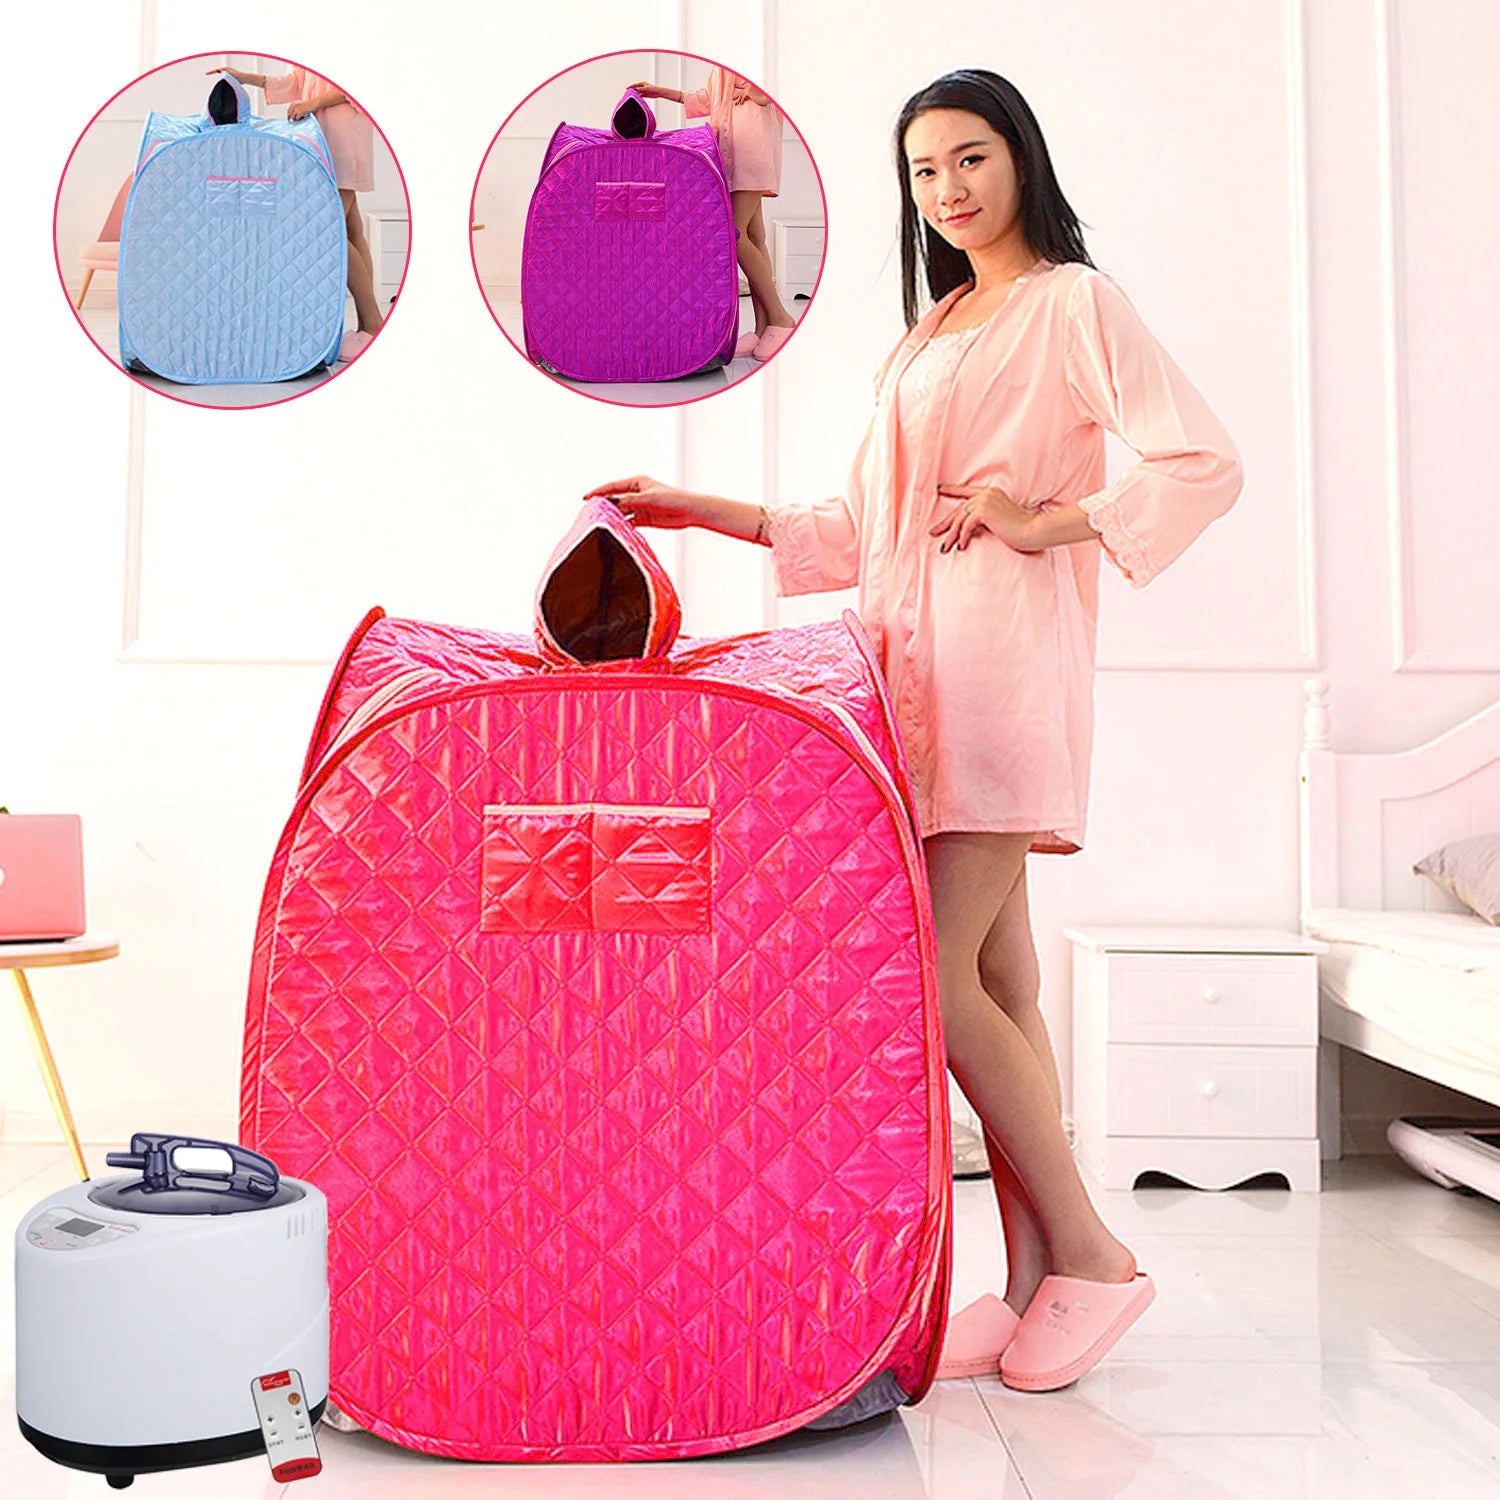 Portable Folding Steam Sauna SPA Room Tent without Steamer free ship for One Person or Two People Weight Loss Full Body Slimming LUXLIFE BRANDS